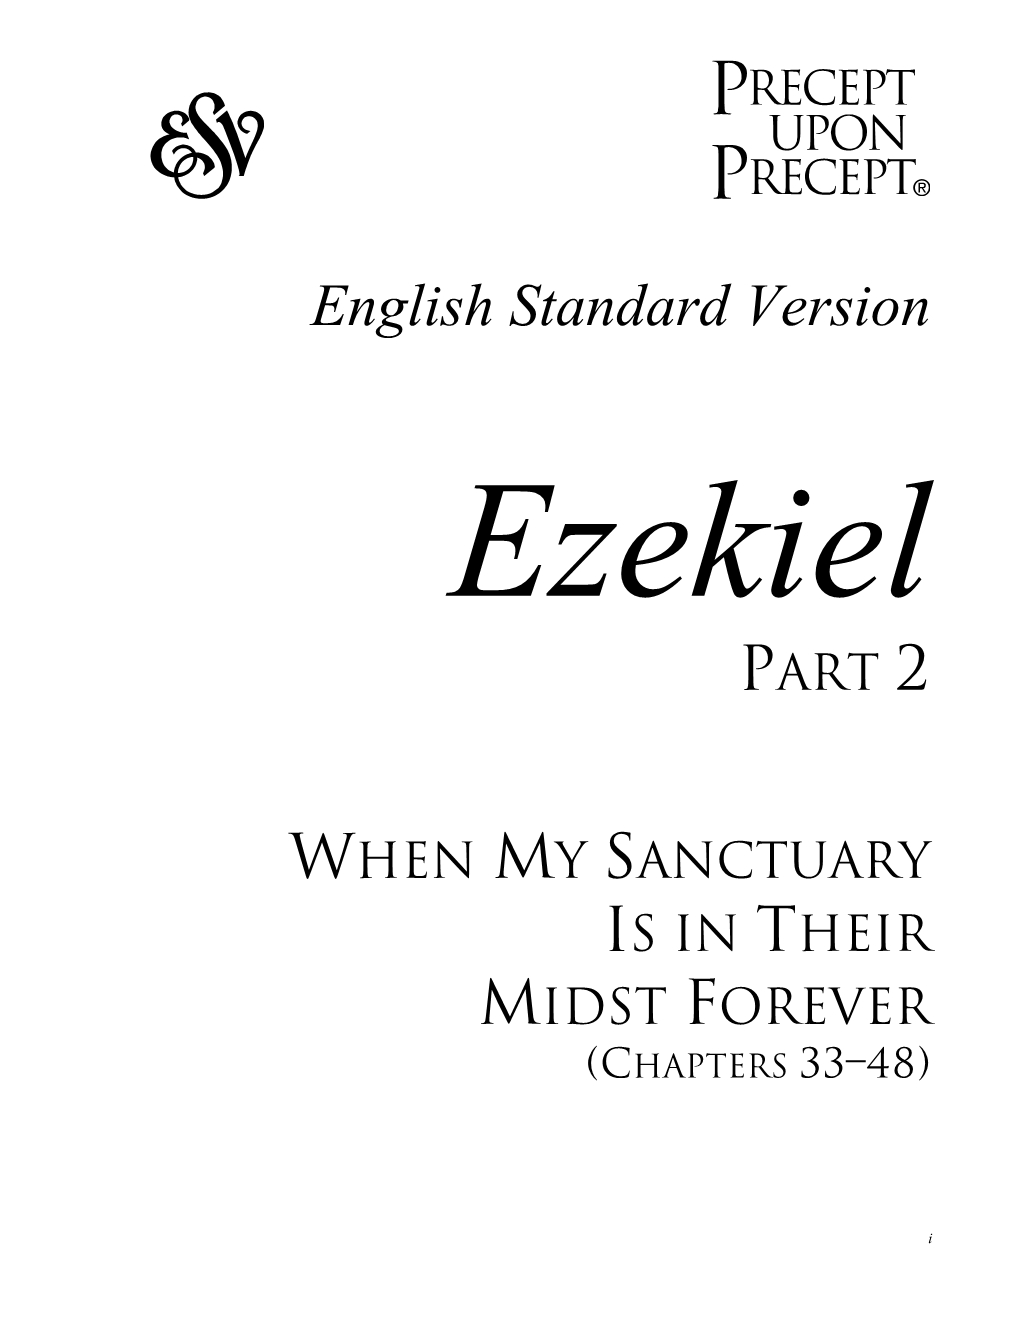 English Standard Version EZEKIEL Part 2 When My Sanctuary Is in Their Midst Forever (Chapters 33–48) © 2013 Precept Ministries International